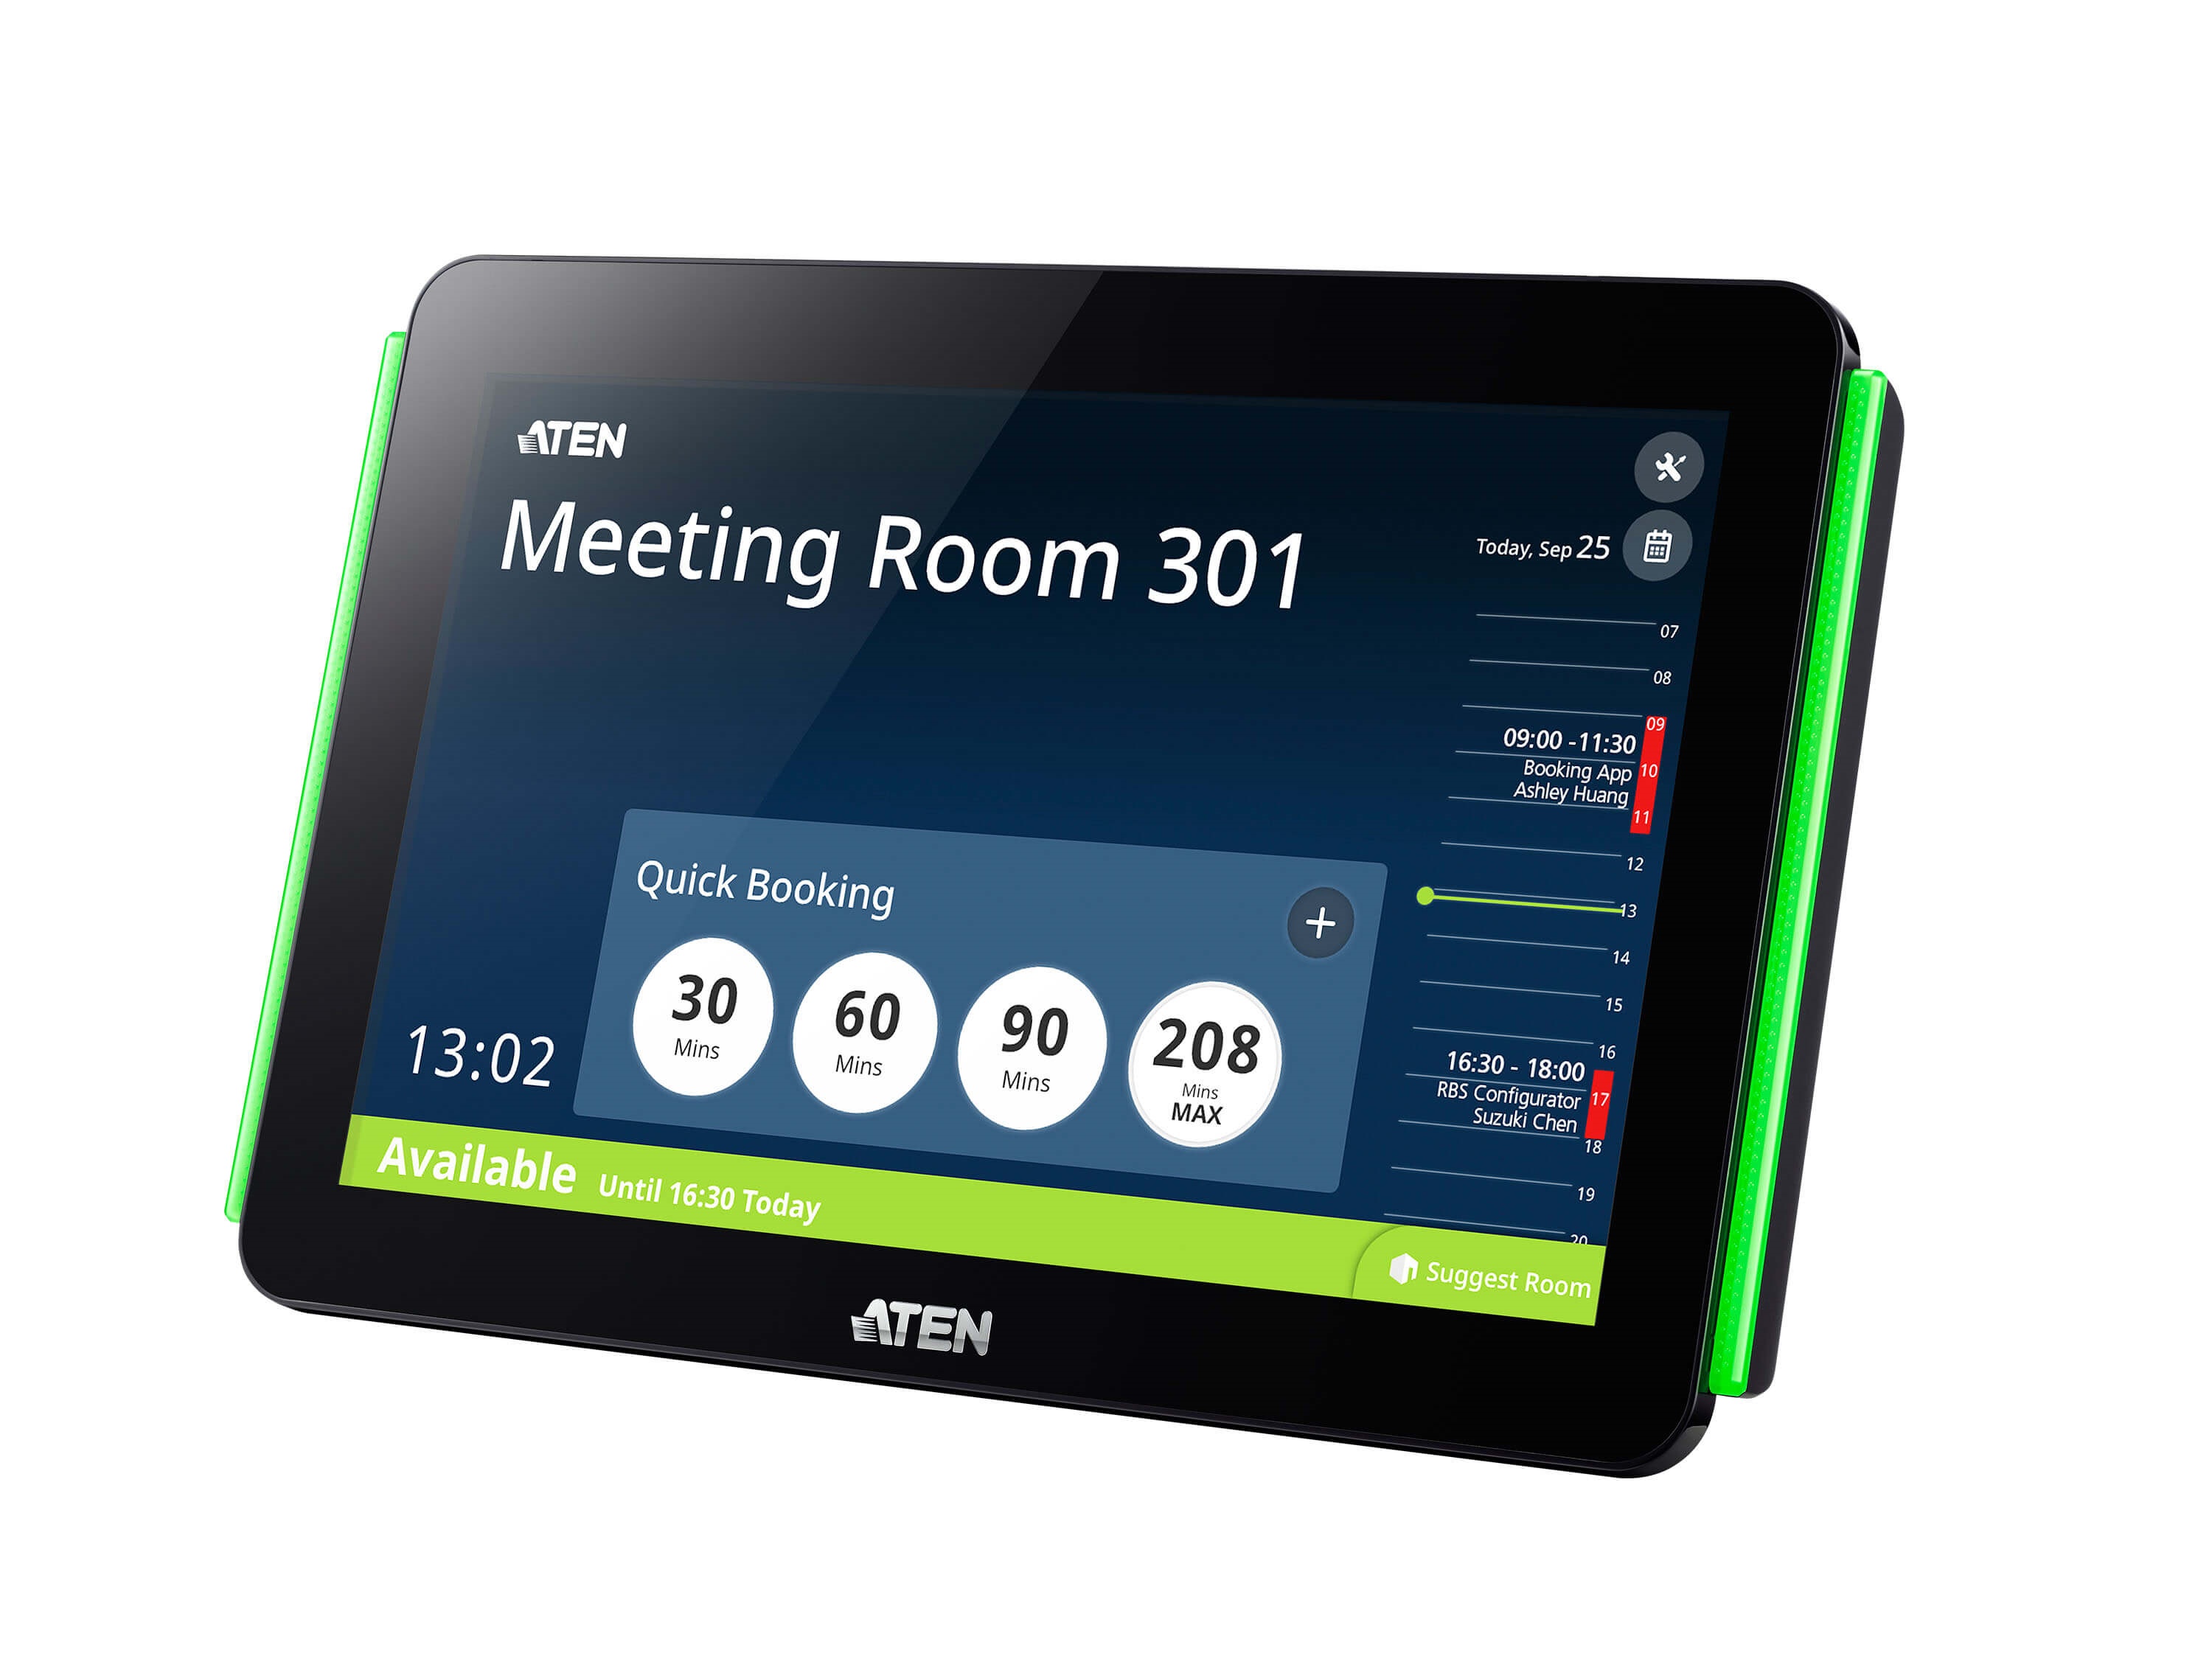 Aten VK430 10.1 inch RBS Panel Room Booking System